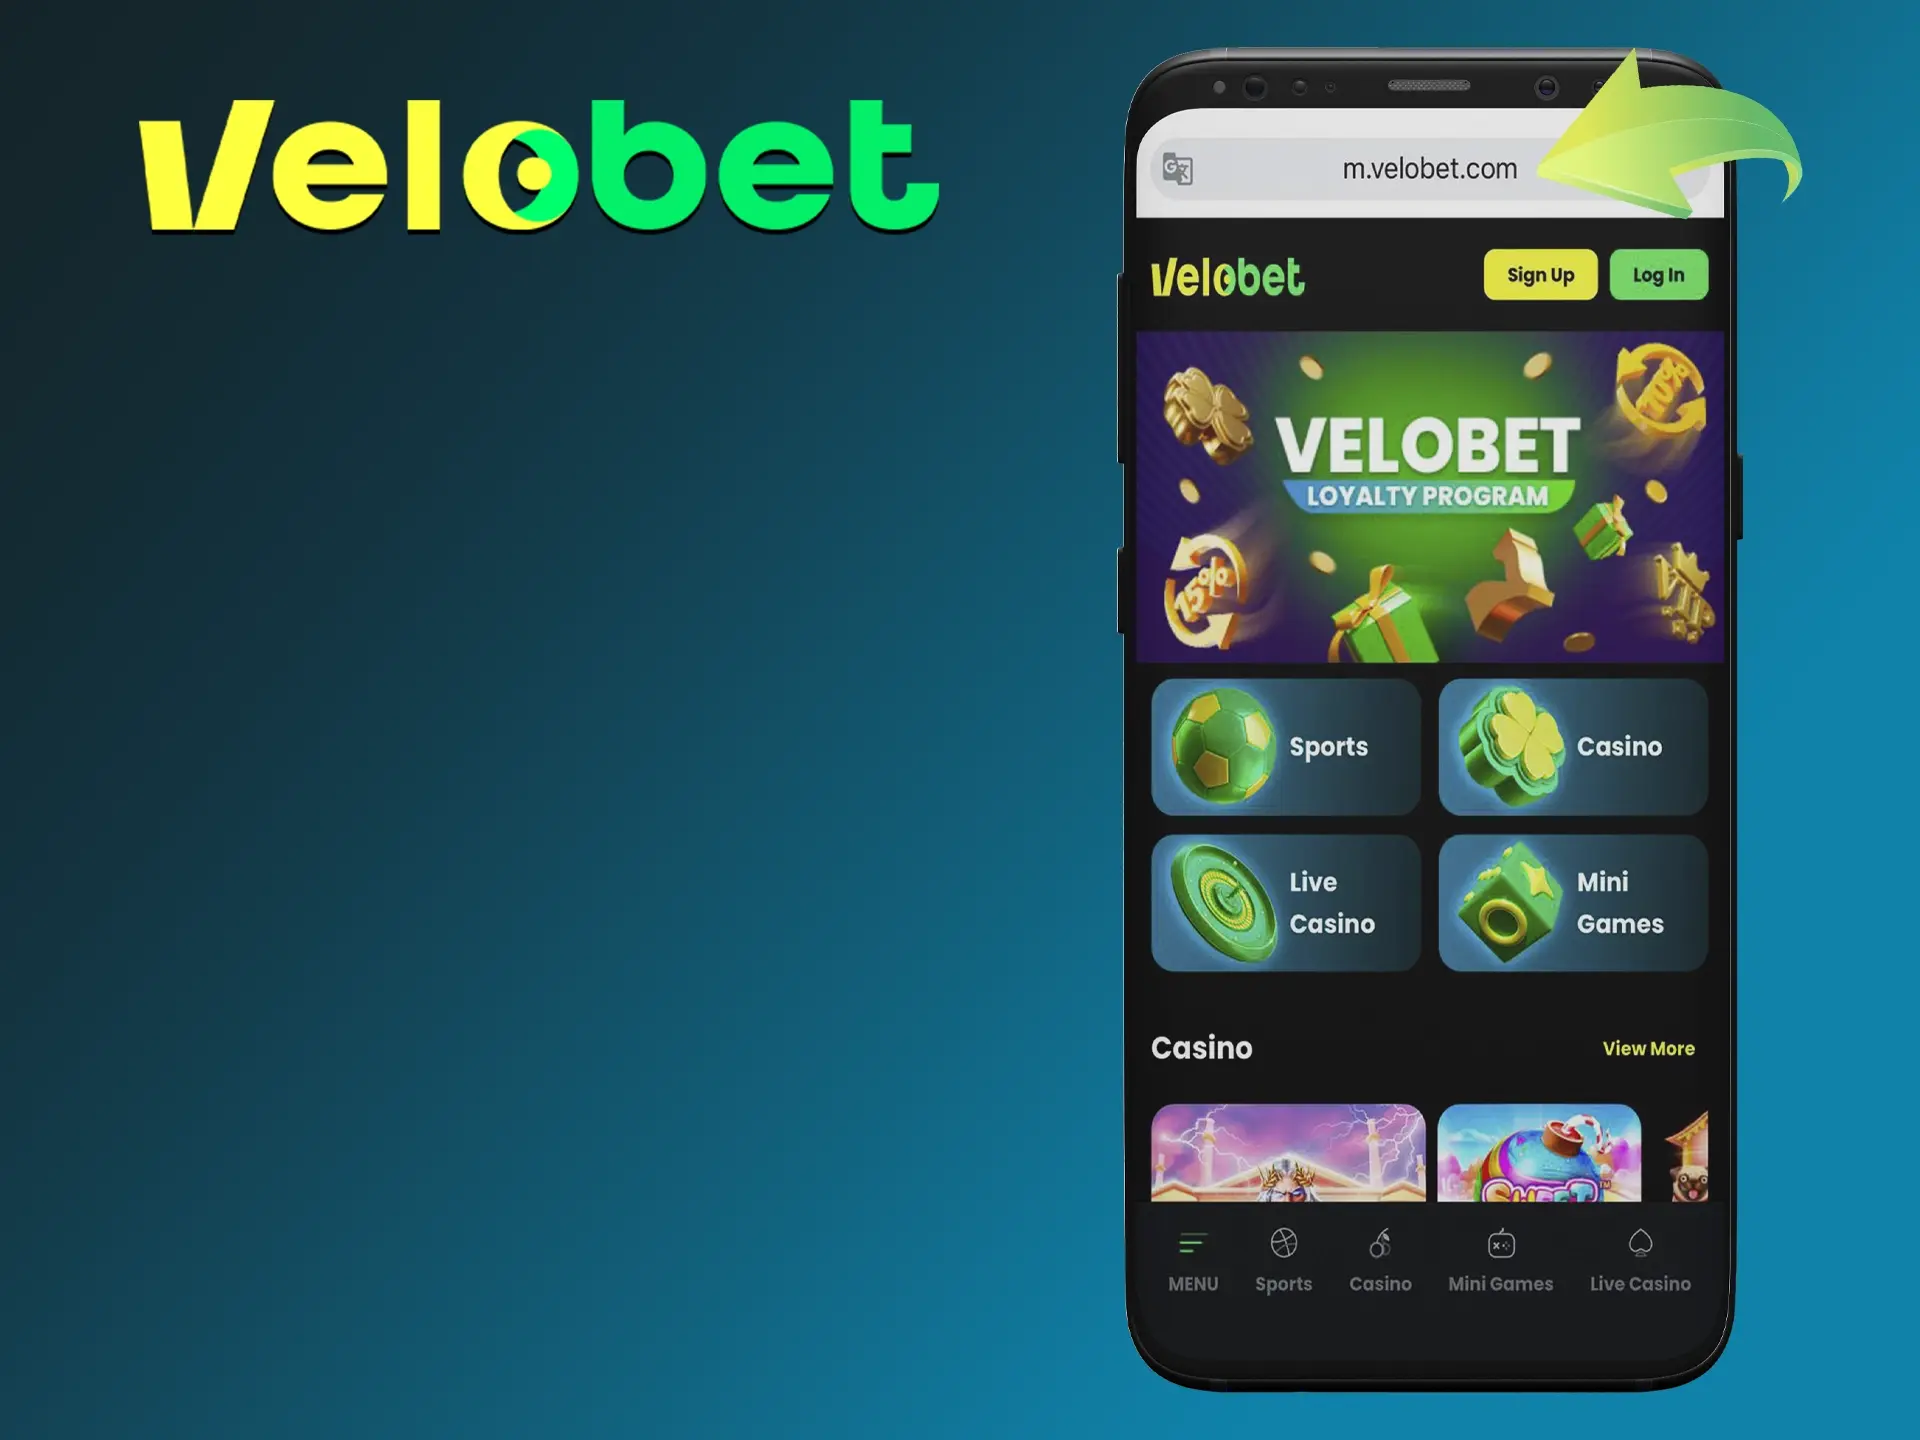 Type Velobet casino site into the address bar of your browser.